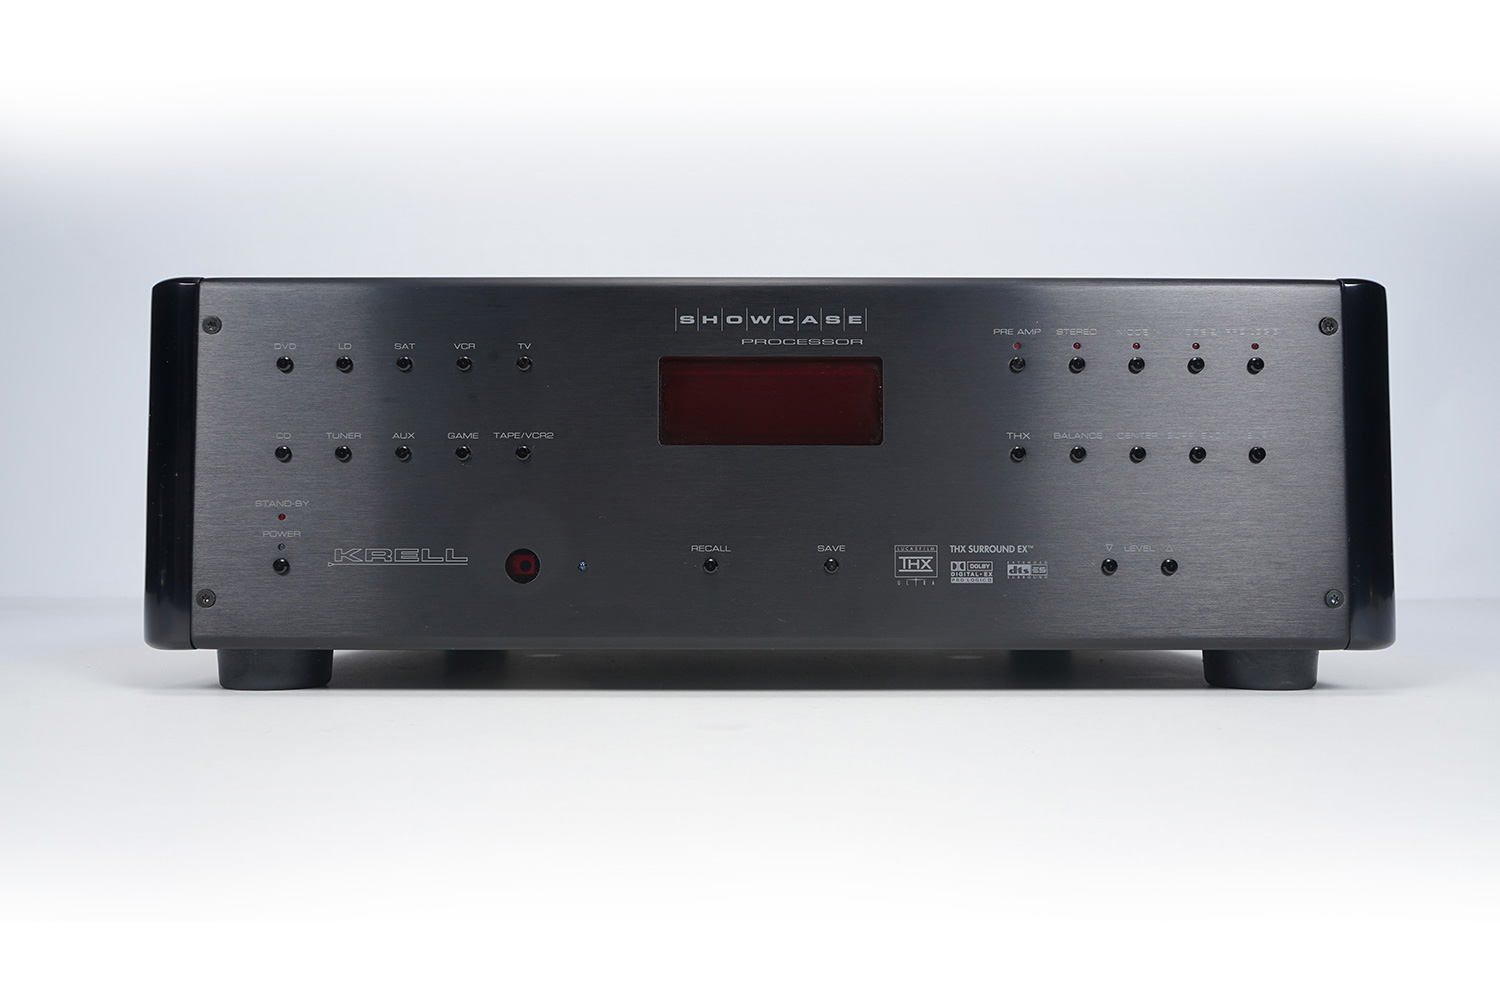 Krell Showcase Surround Sound Processor – High End Stereo Equipment We Buy